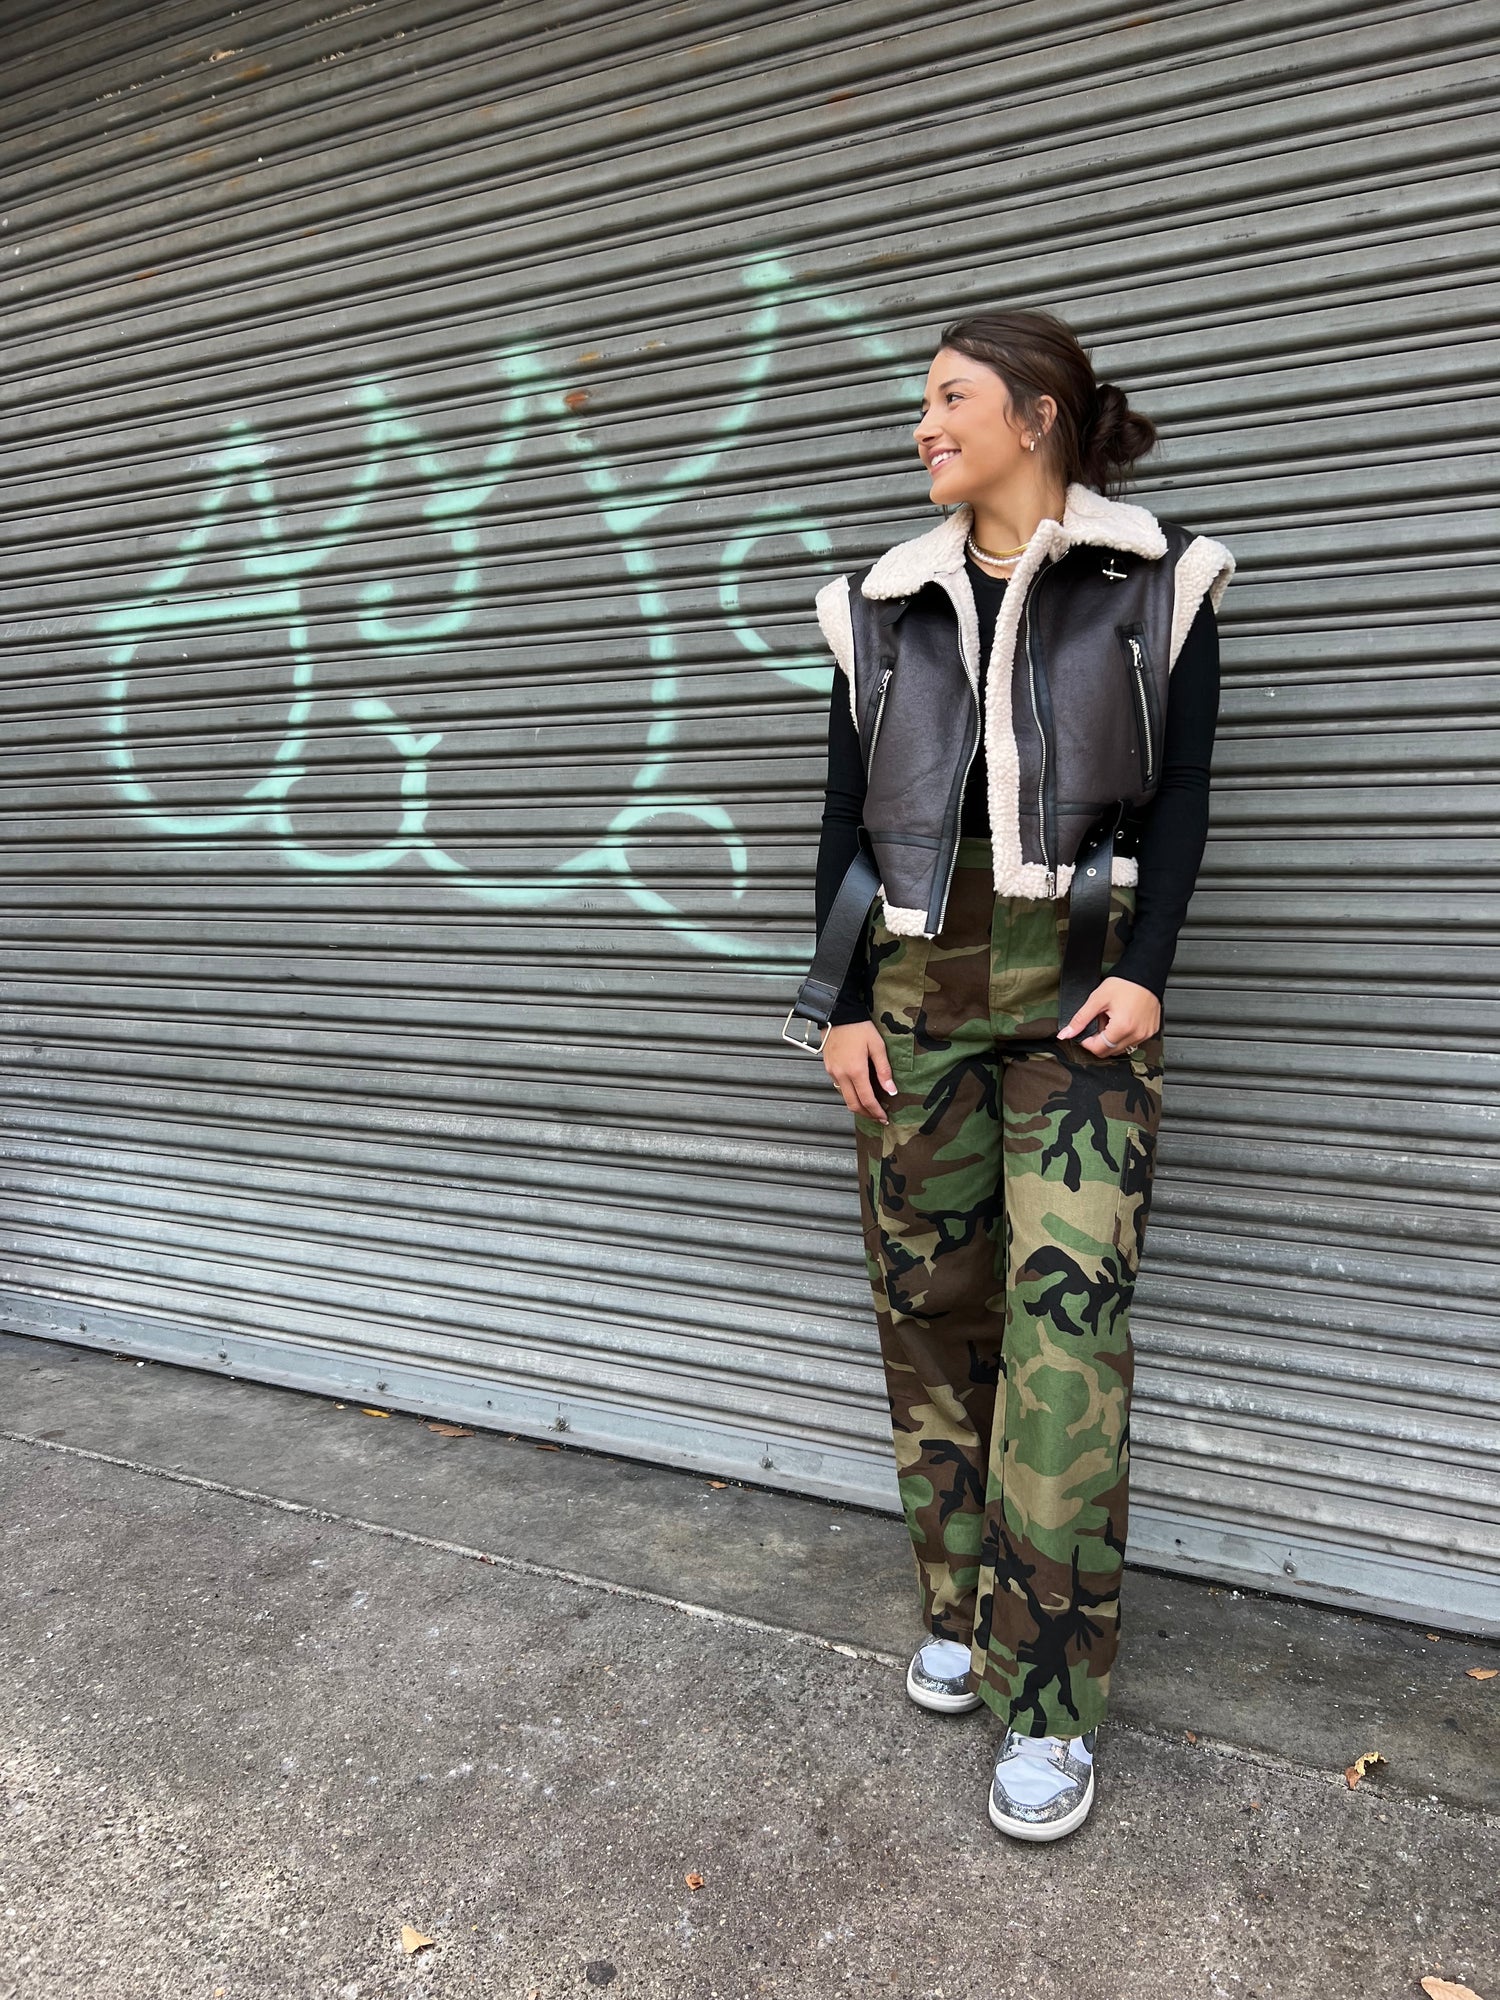 Styling Plus Size Camo Pants for Fall 2020 - Fro Plus Fashion